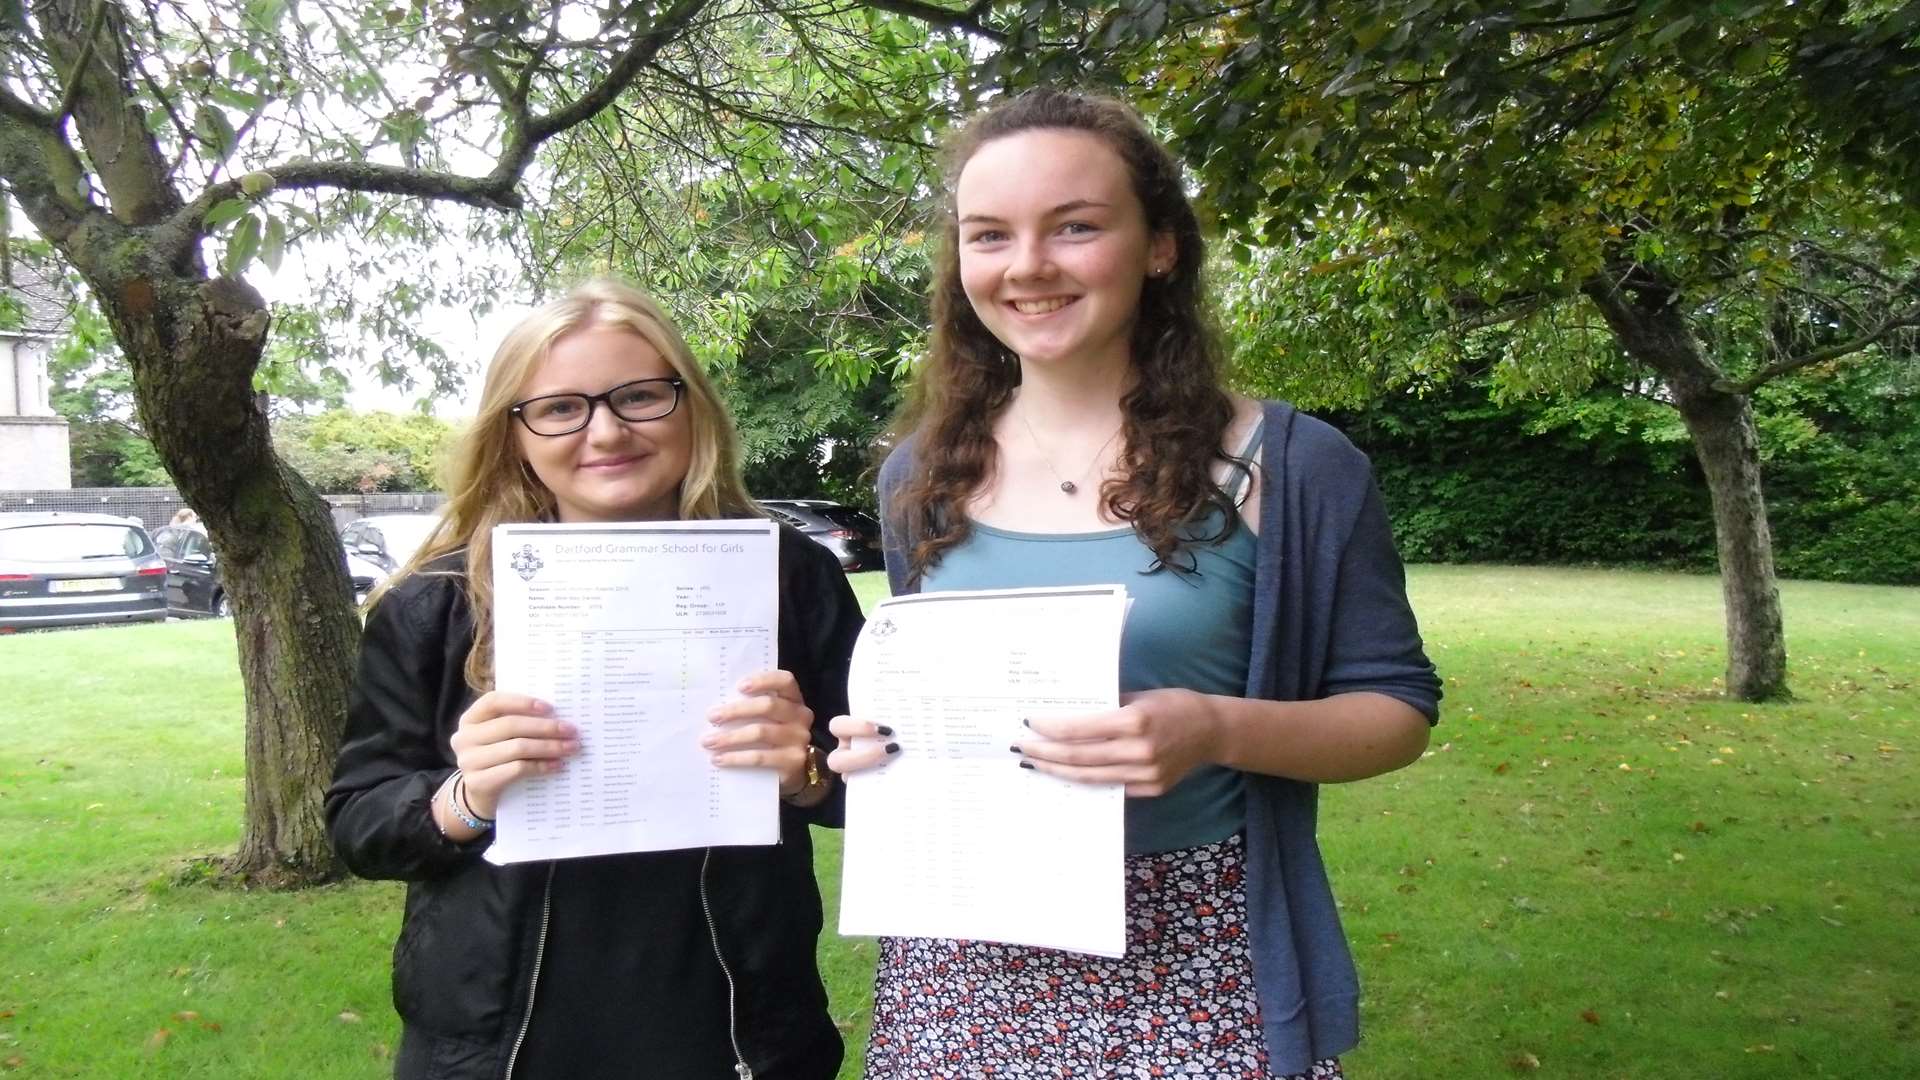 Alice Daniels and Caitlin Stevenson from Dartford Grammar School for Girls who between them achieved 16 A*s, 6 As